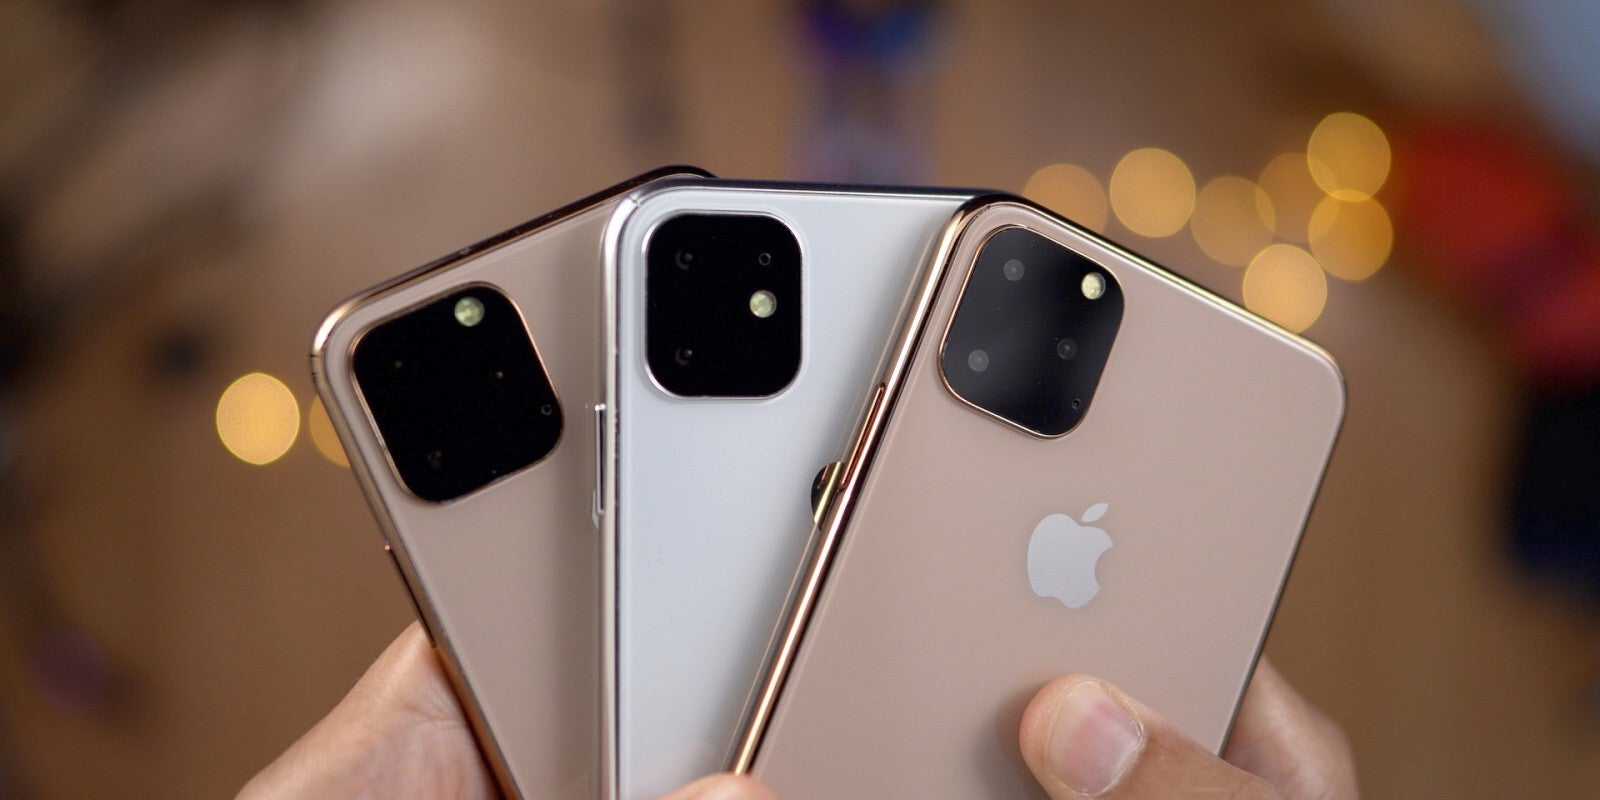 Renders of the Apple iPhone 11 Pro - 2019 Apple iPhone pre-order and release dates leaked